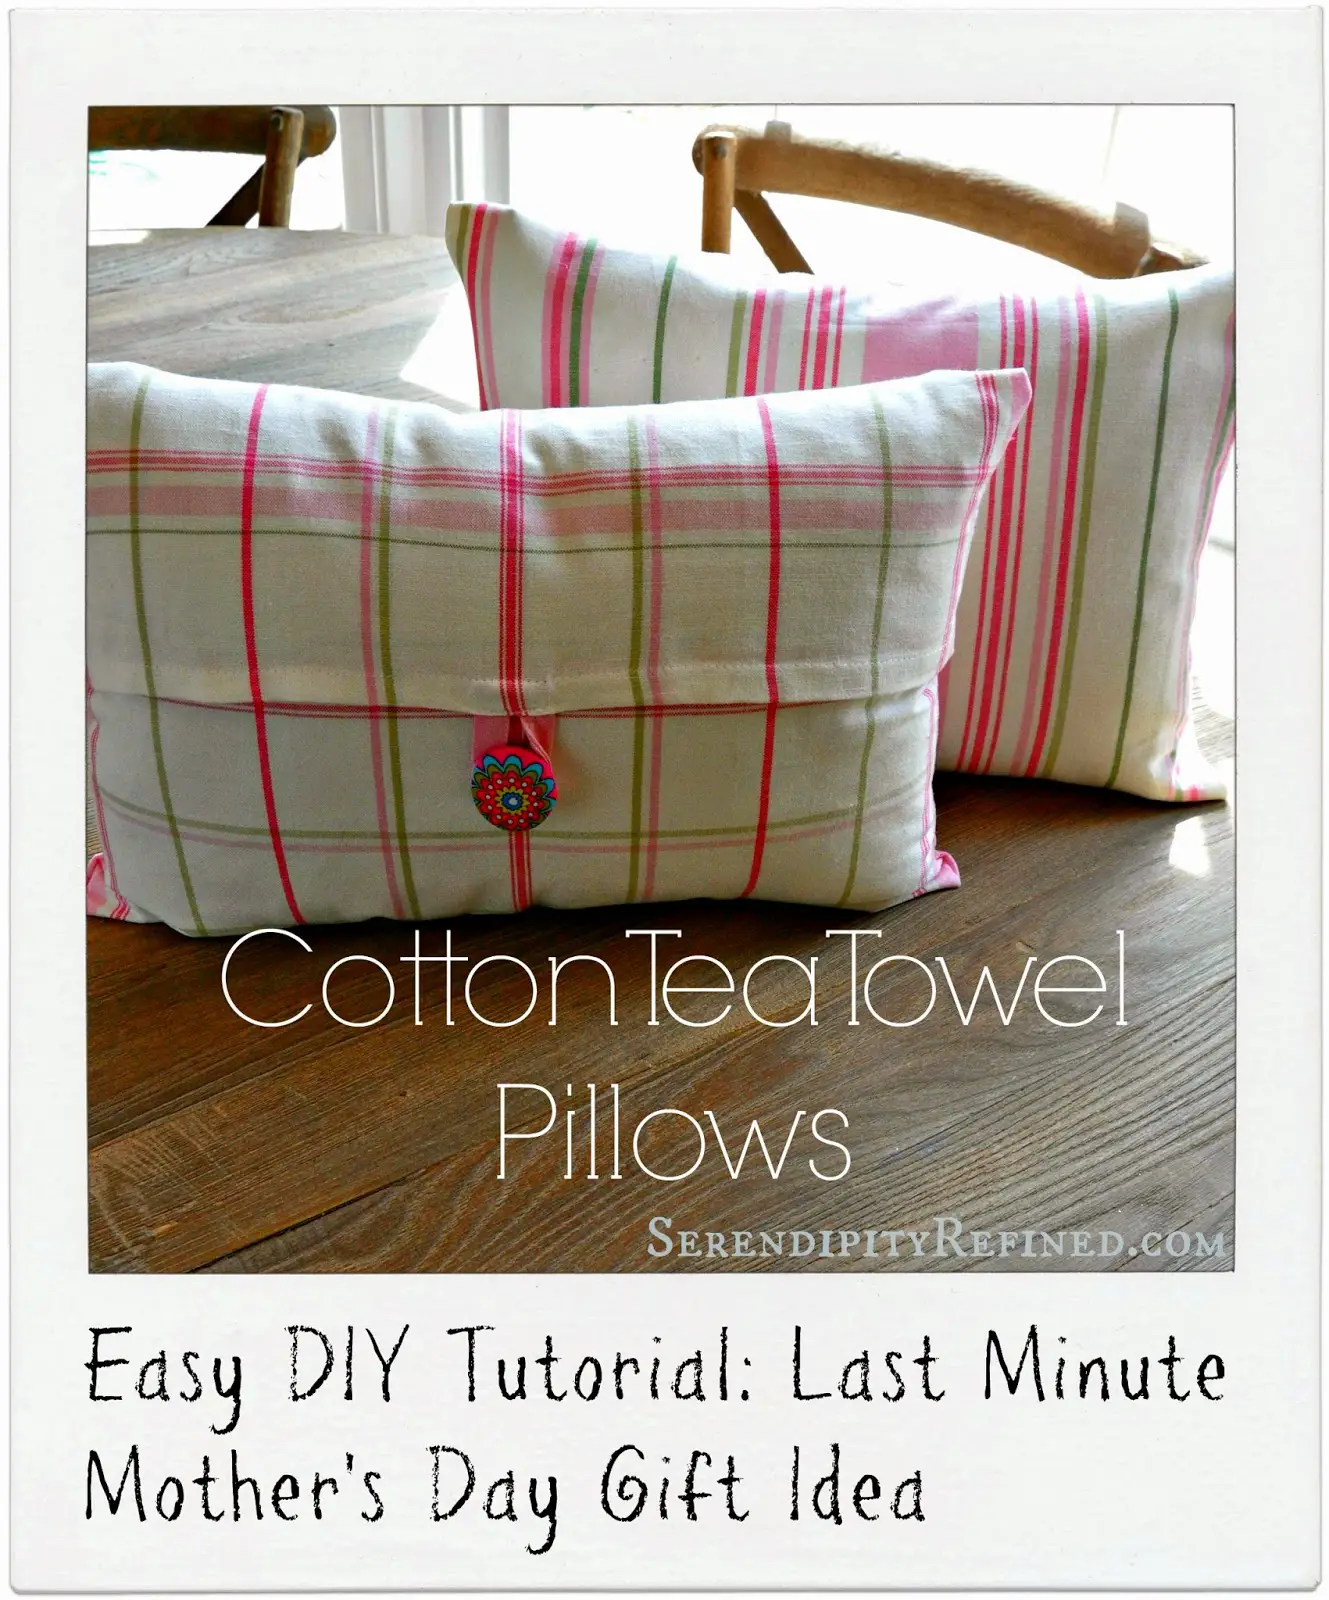 Serendipity Refined Blog: How To Make An Easy DIY Tea Towel Pillow